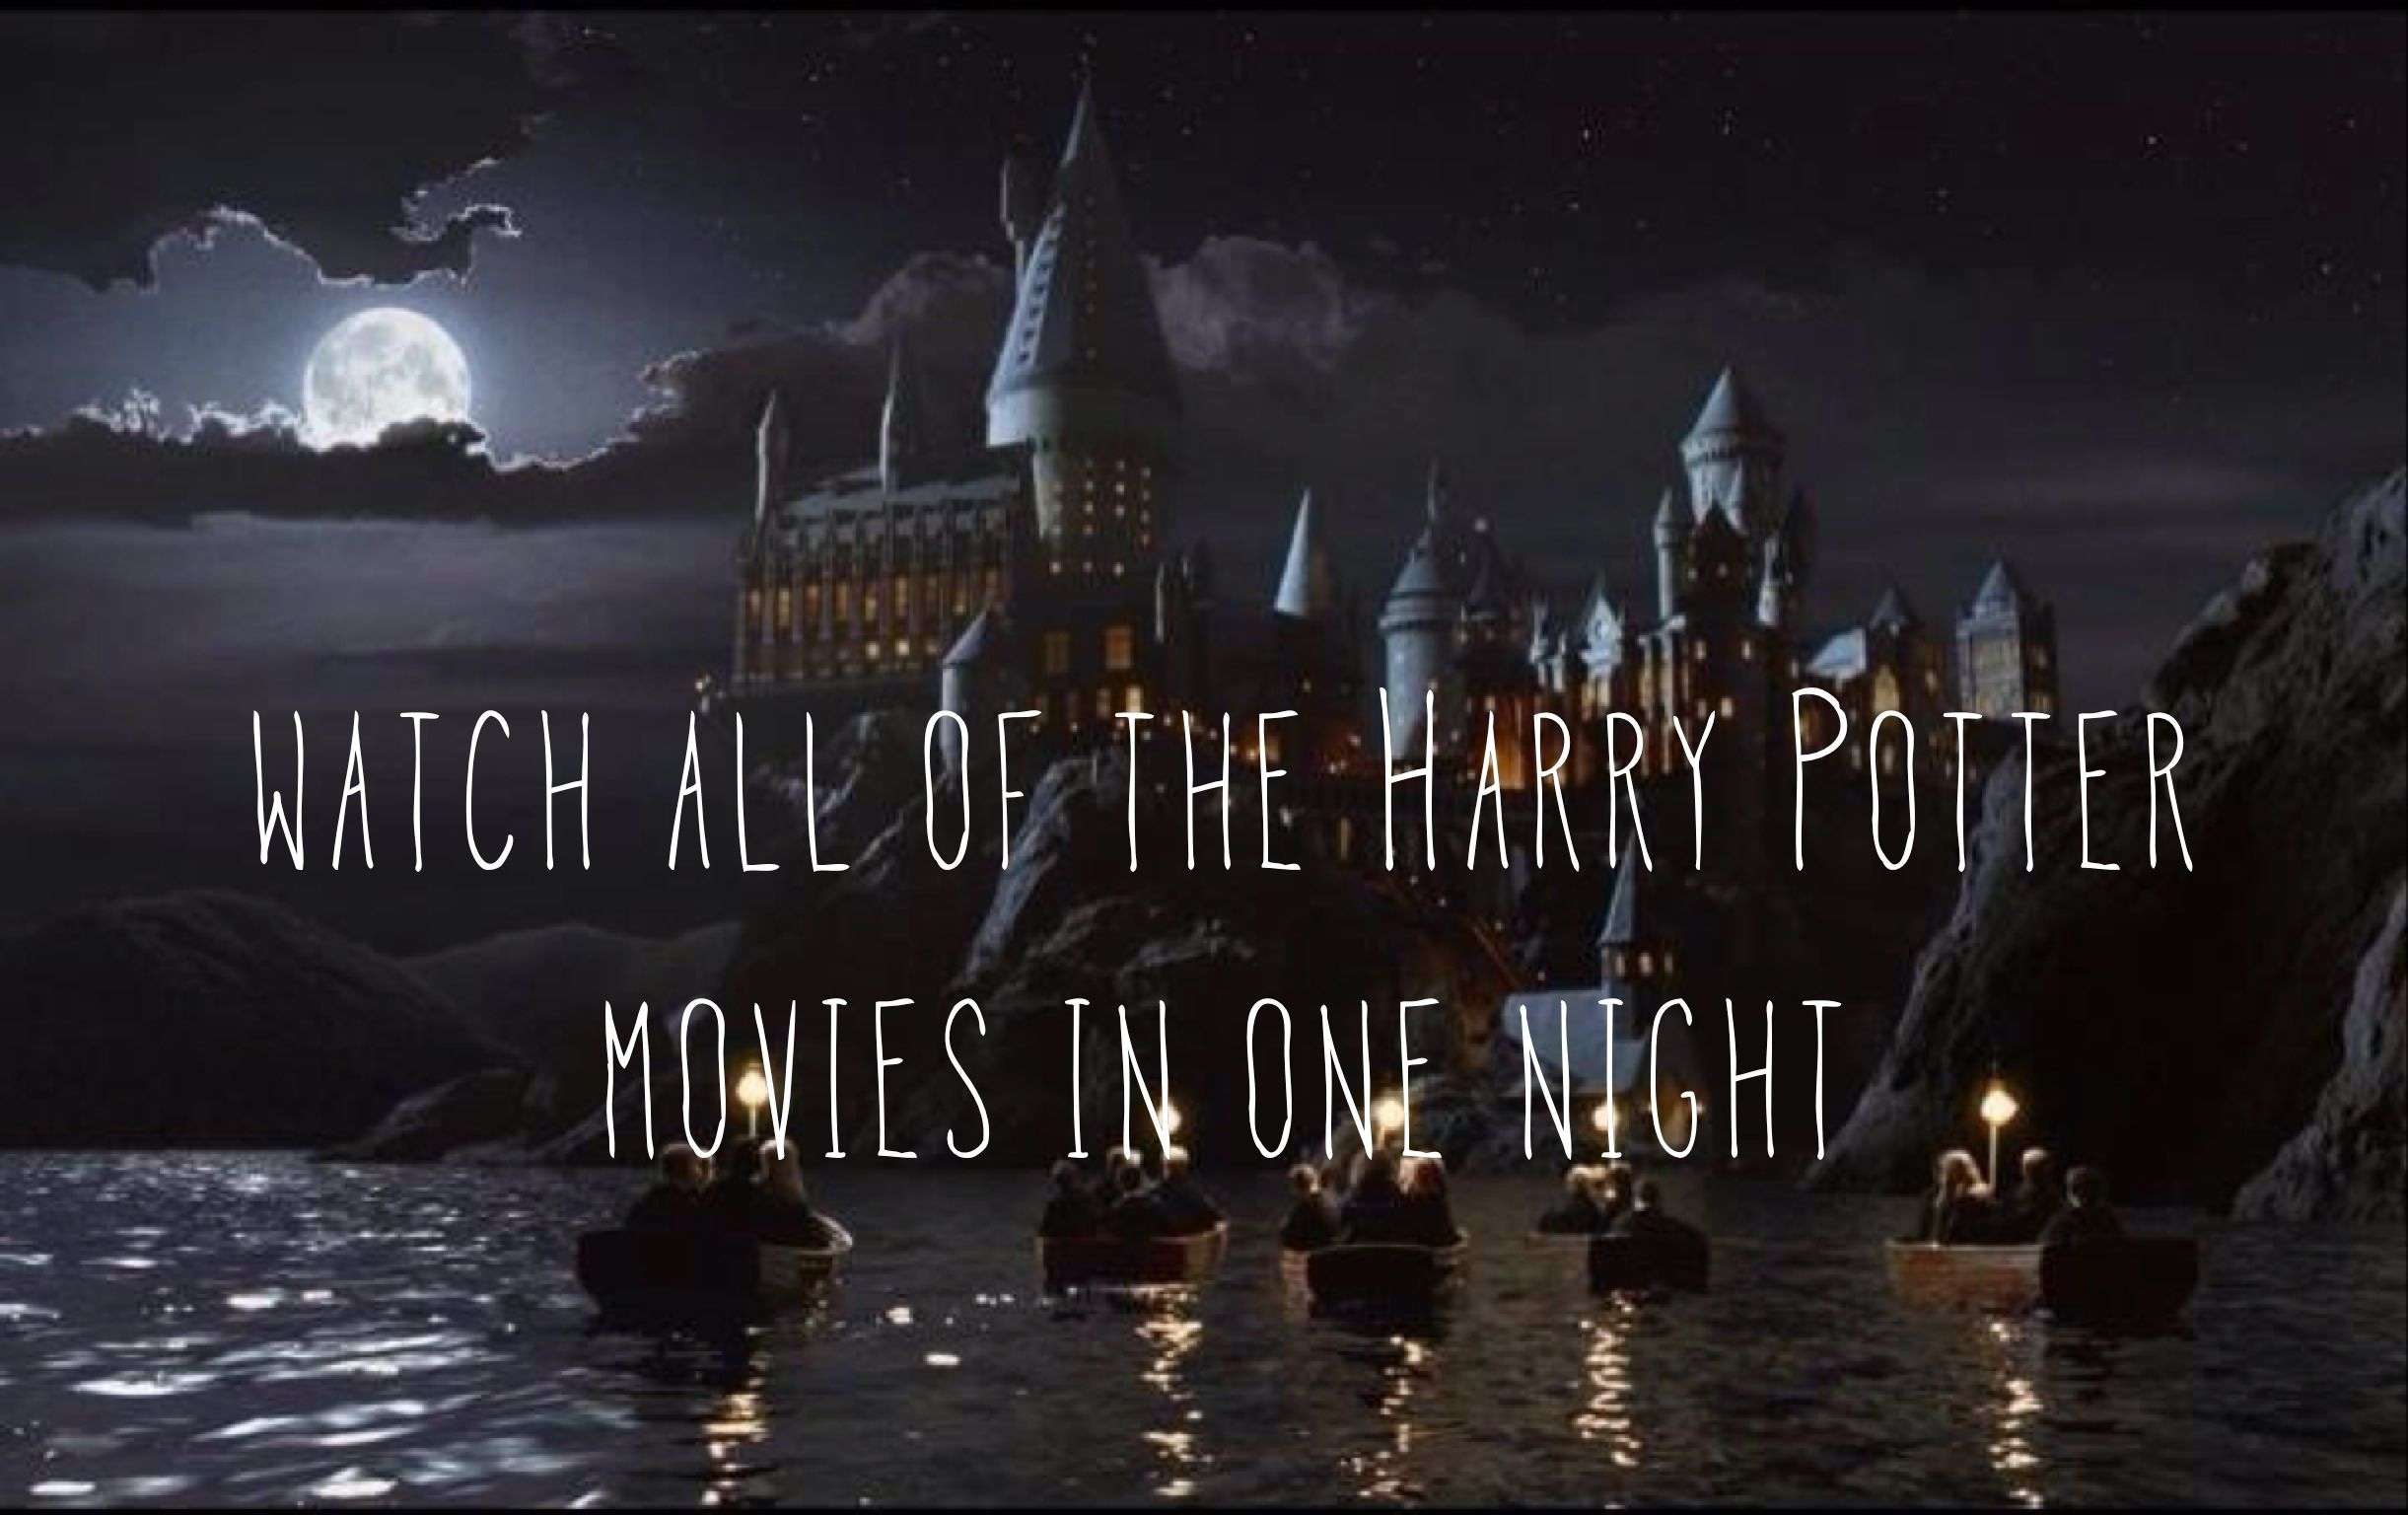 Watch all of the Harry Potter movies in one night